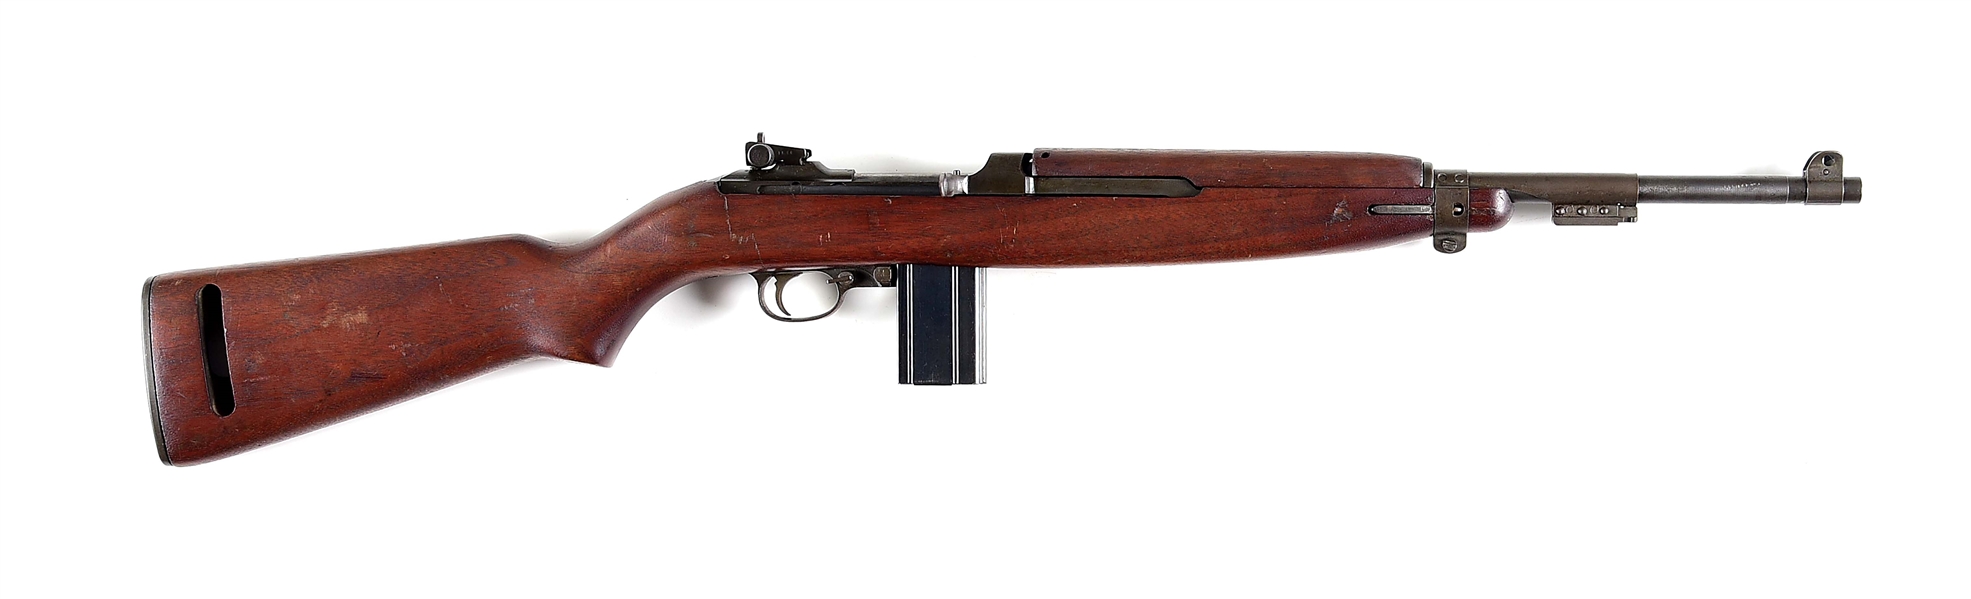 (C) EARLY 6 DIGIT INLAND DIVISION M1 SEMI-AUTOMATIC CARBINE.